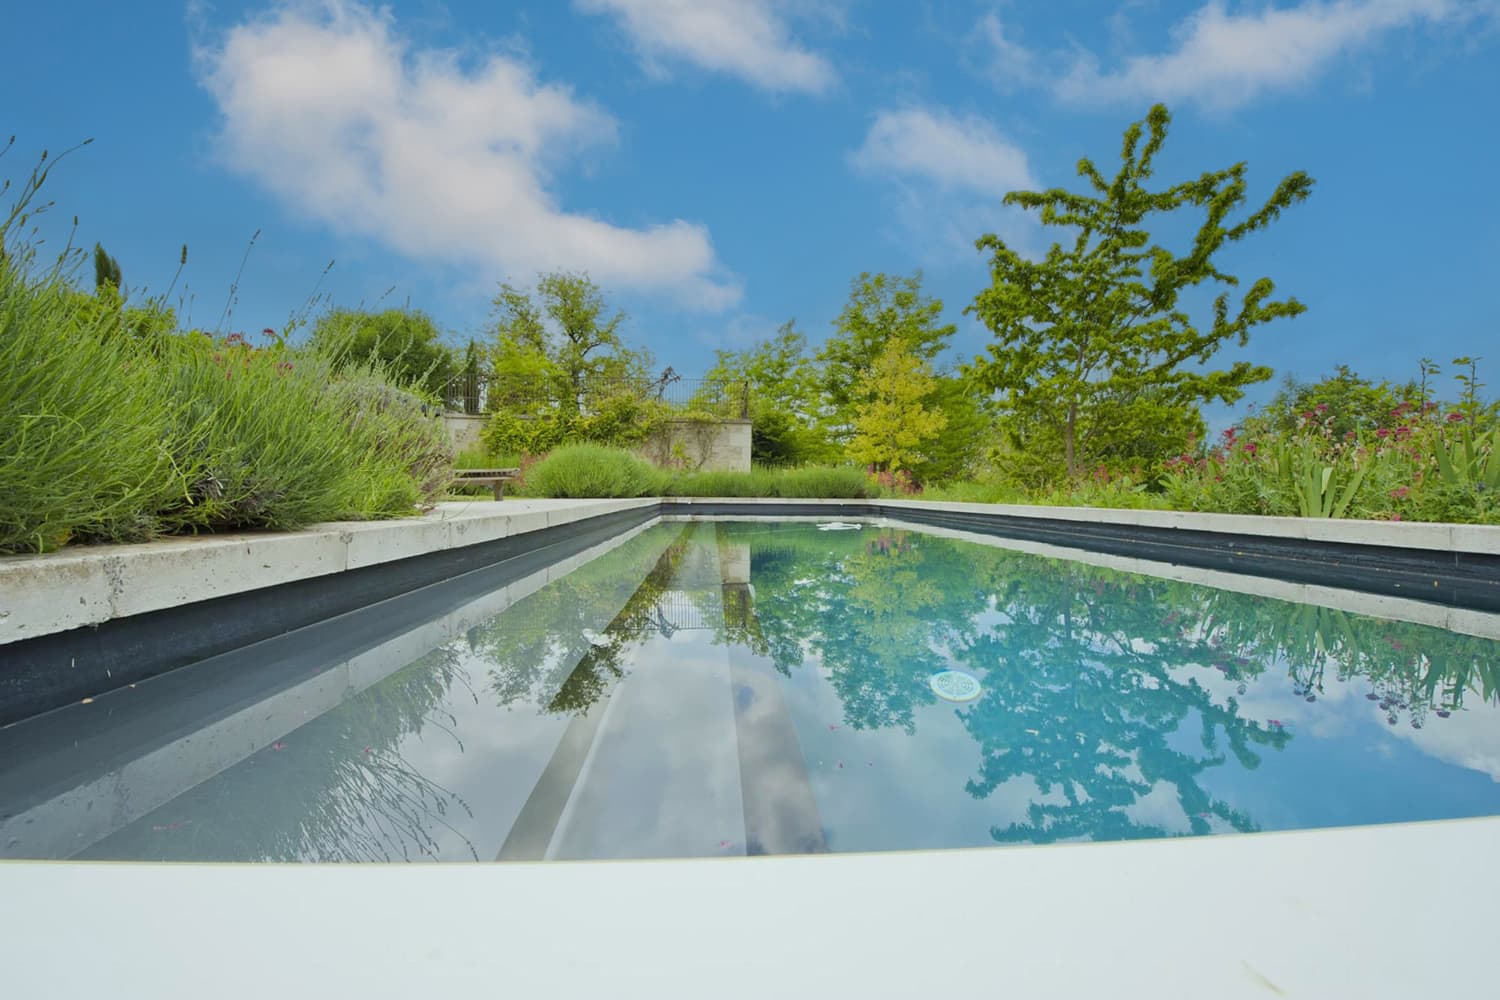 Private solar heated pool